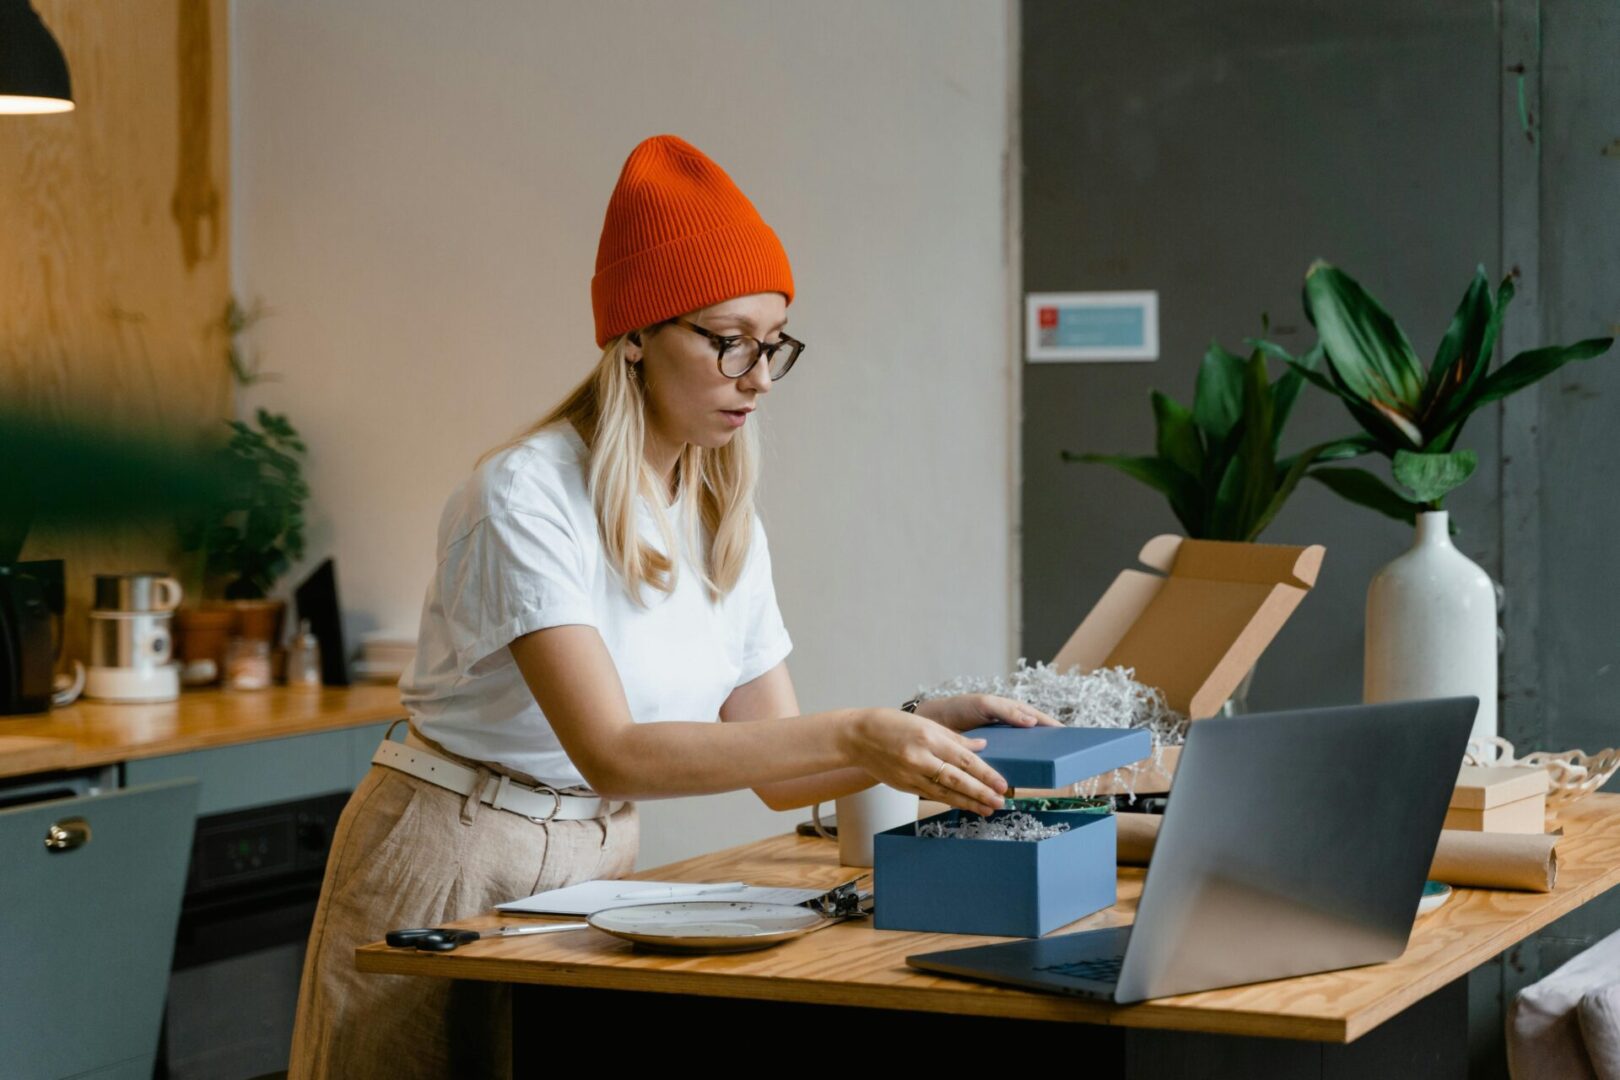 A woman in an orange hat is working on her laptop.